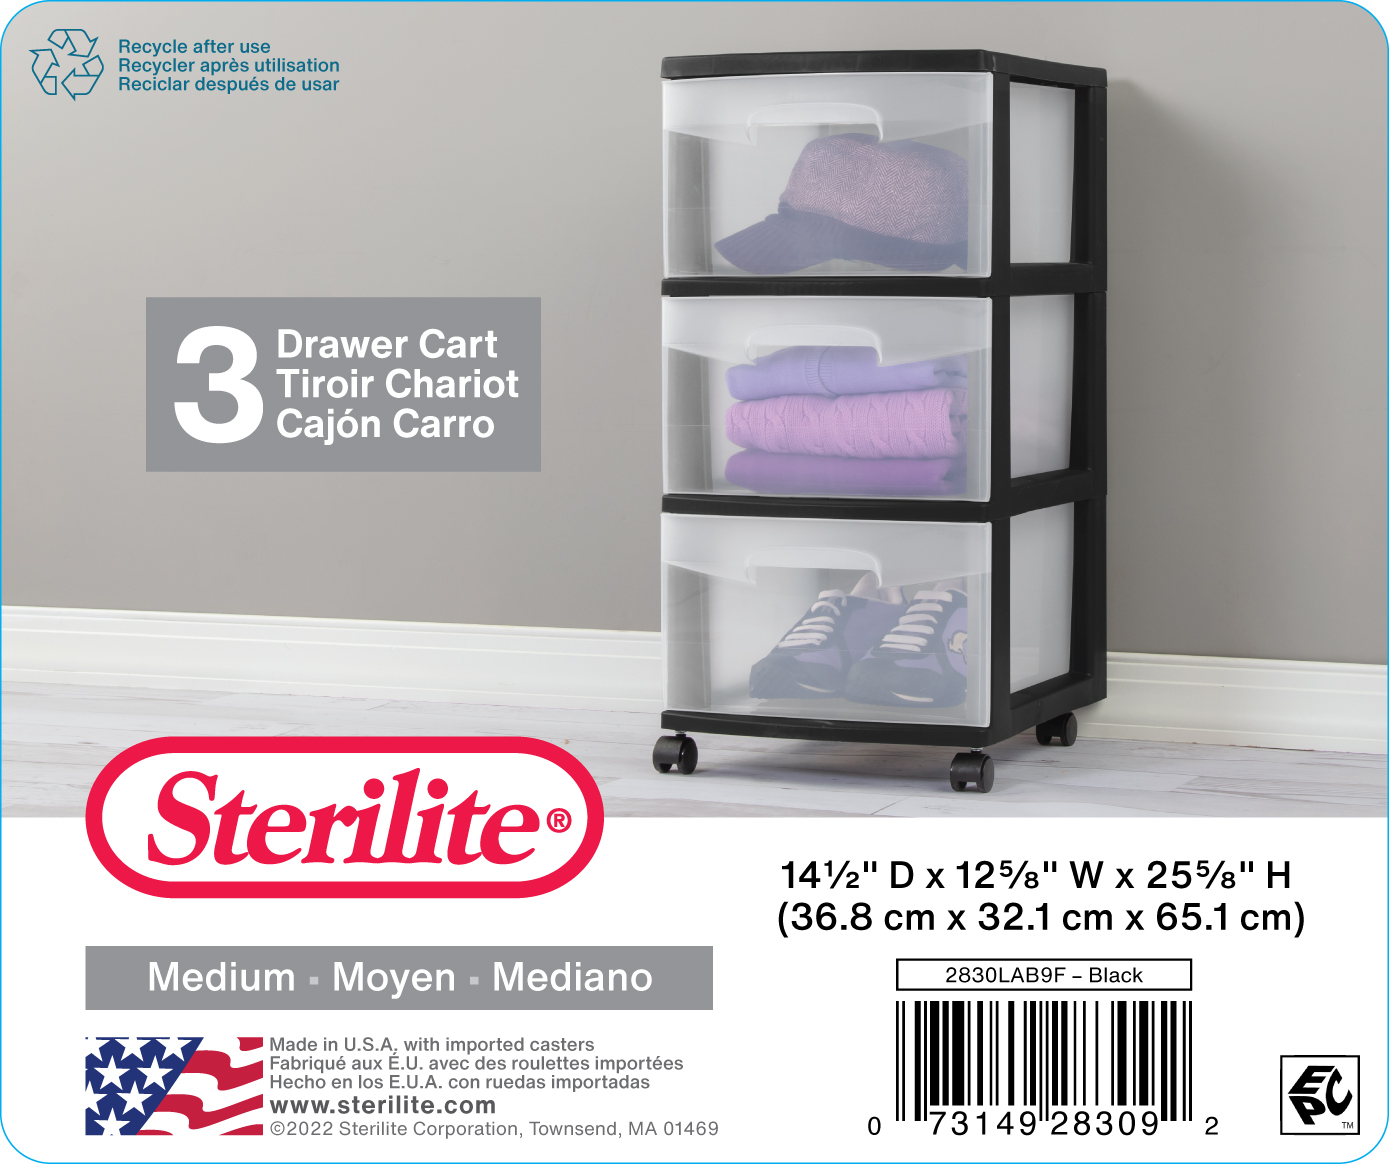 Sterilite 3 Drawer Plastic Cart, Black with Clear Drawers, Adult - image 8 of 8